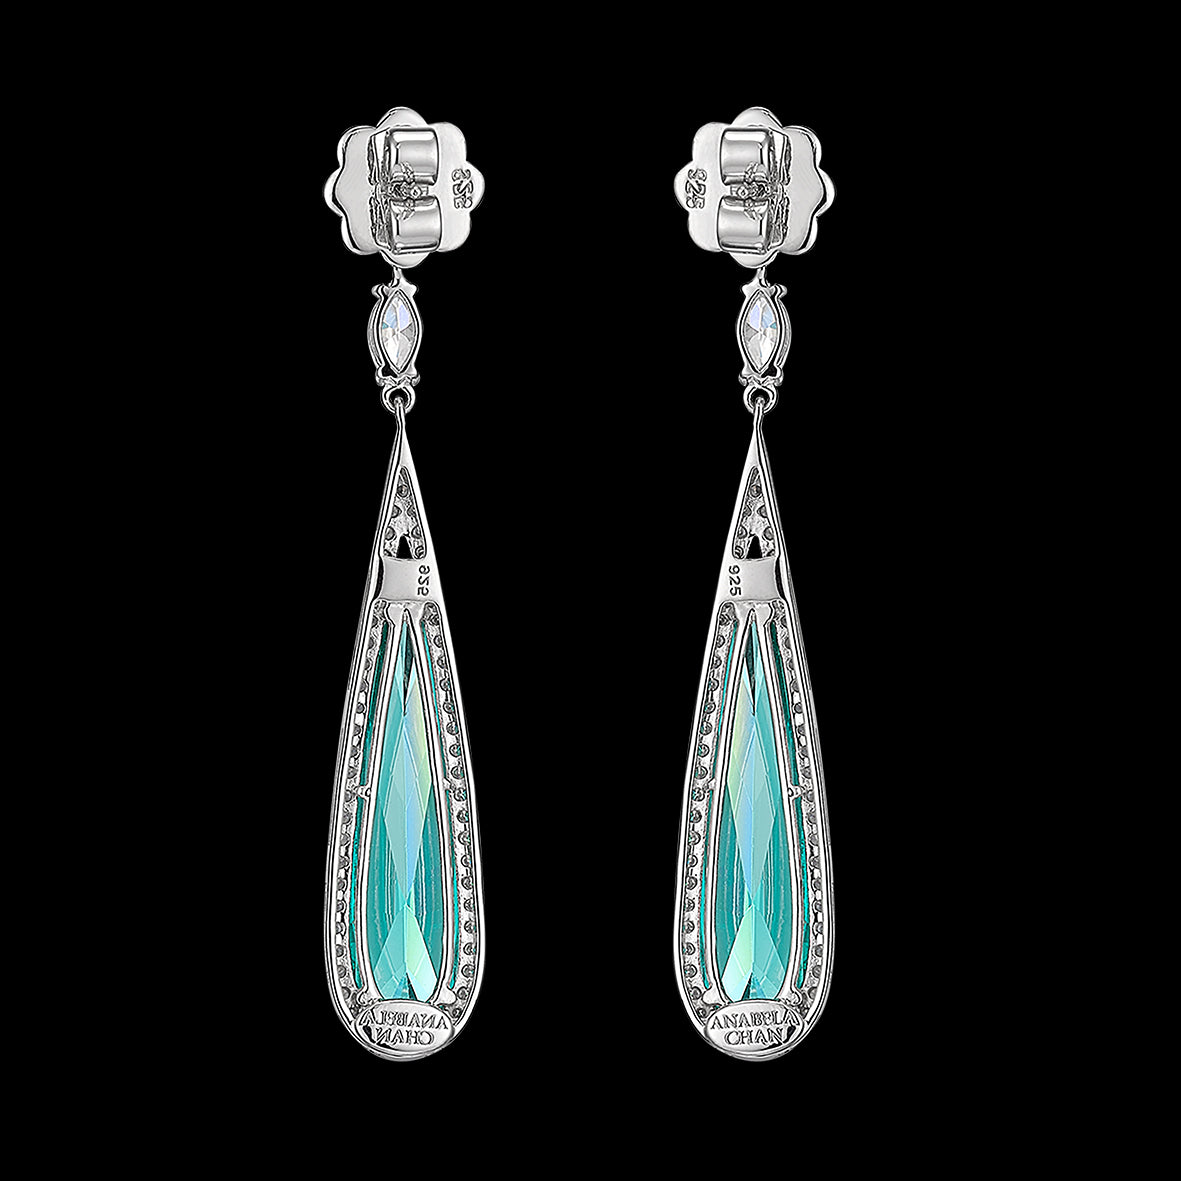 Paraiba Shard Earrings, Earrings, Anabela Chan Joaillerie - Fine jewelry with laboratory grown and created gemstones hand-crafted in the United Kingdom. Anabela Chan Joaillerie is the first fine jewellery brand in the world to champion laboratory-grown and created gemstones with high jewellery design, artisanal craftsmanship and a focus on ethical and sustainable innovations.